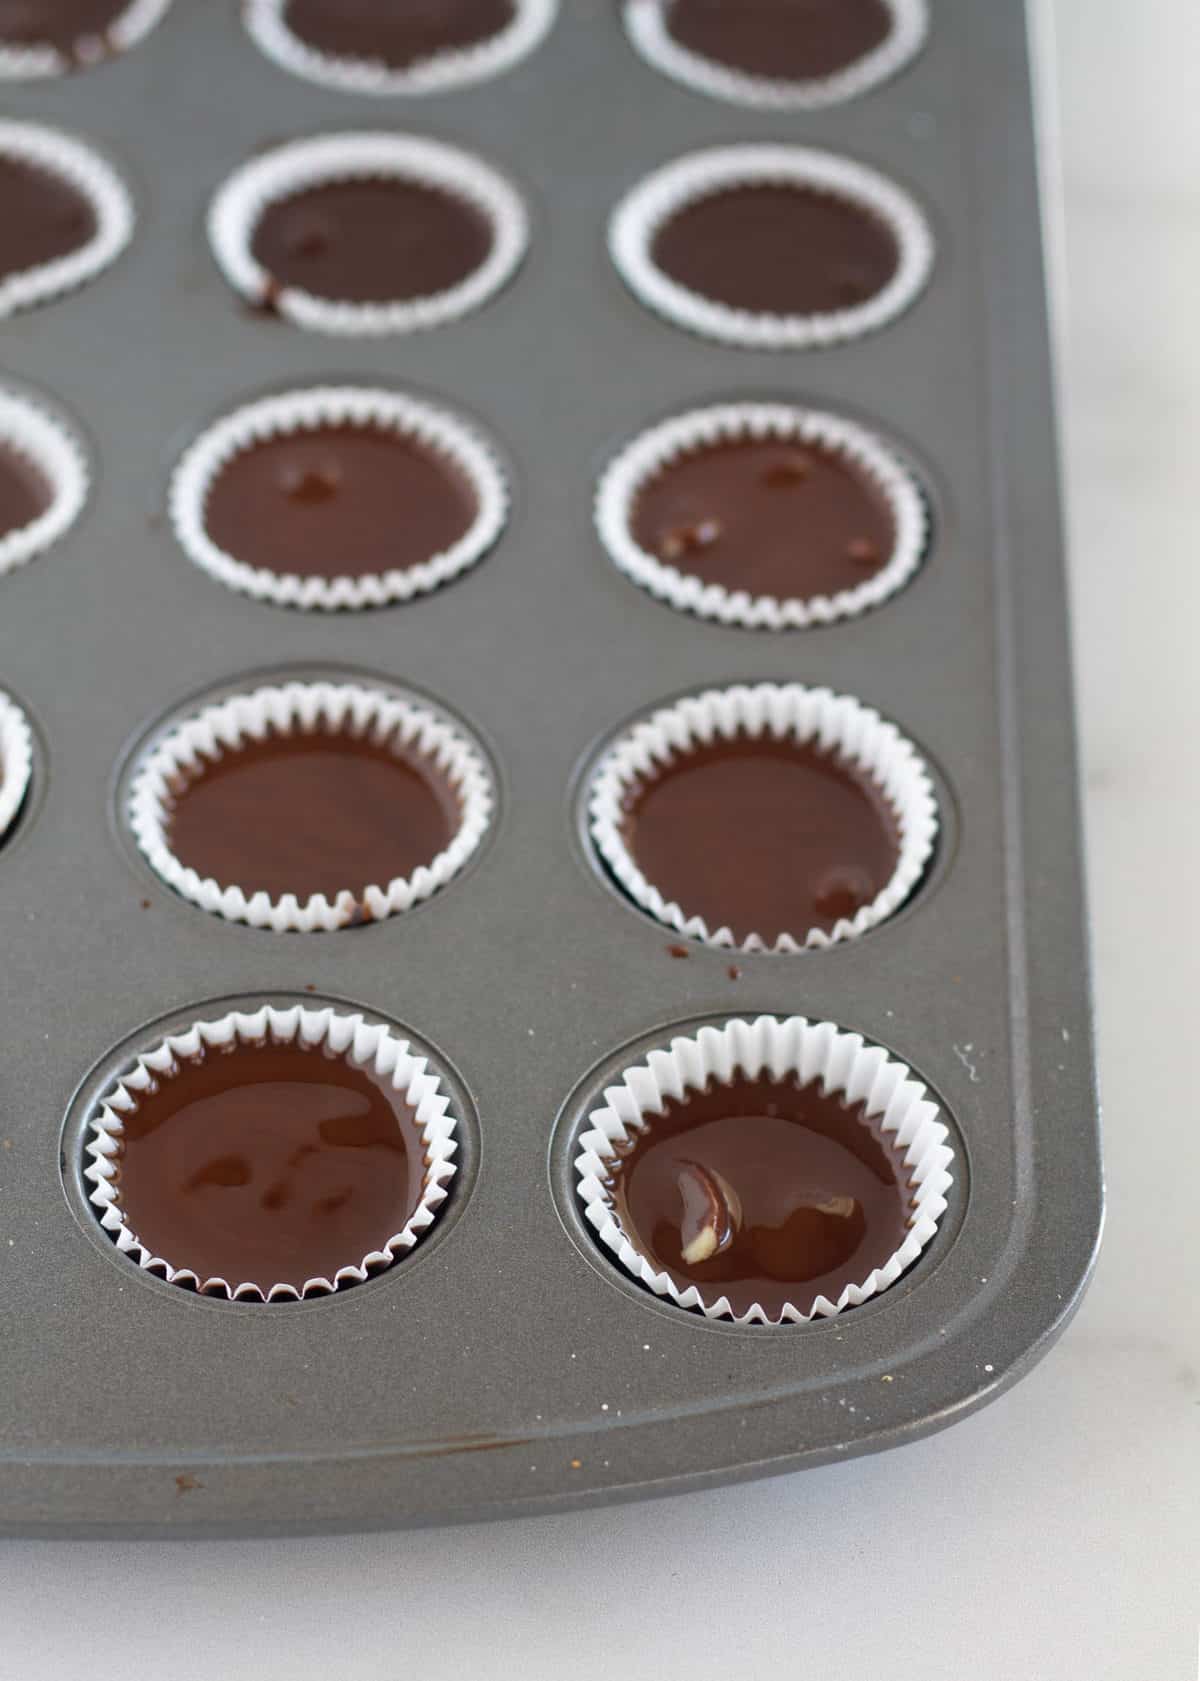 Melted chocolate drizzled over macadamia nuts in mini muffin tin.